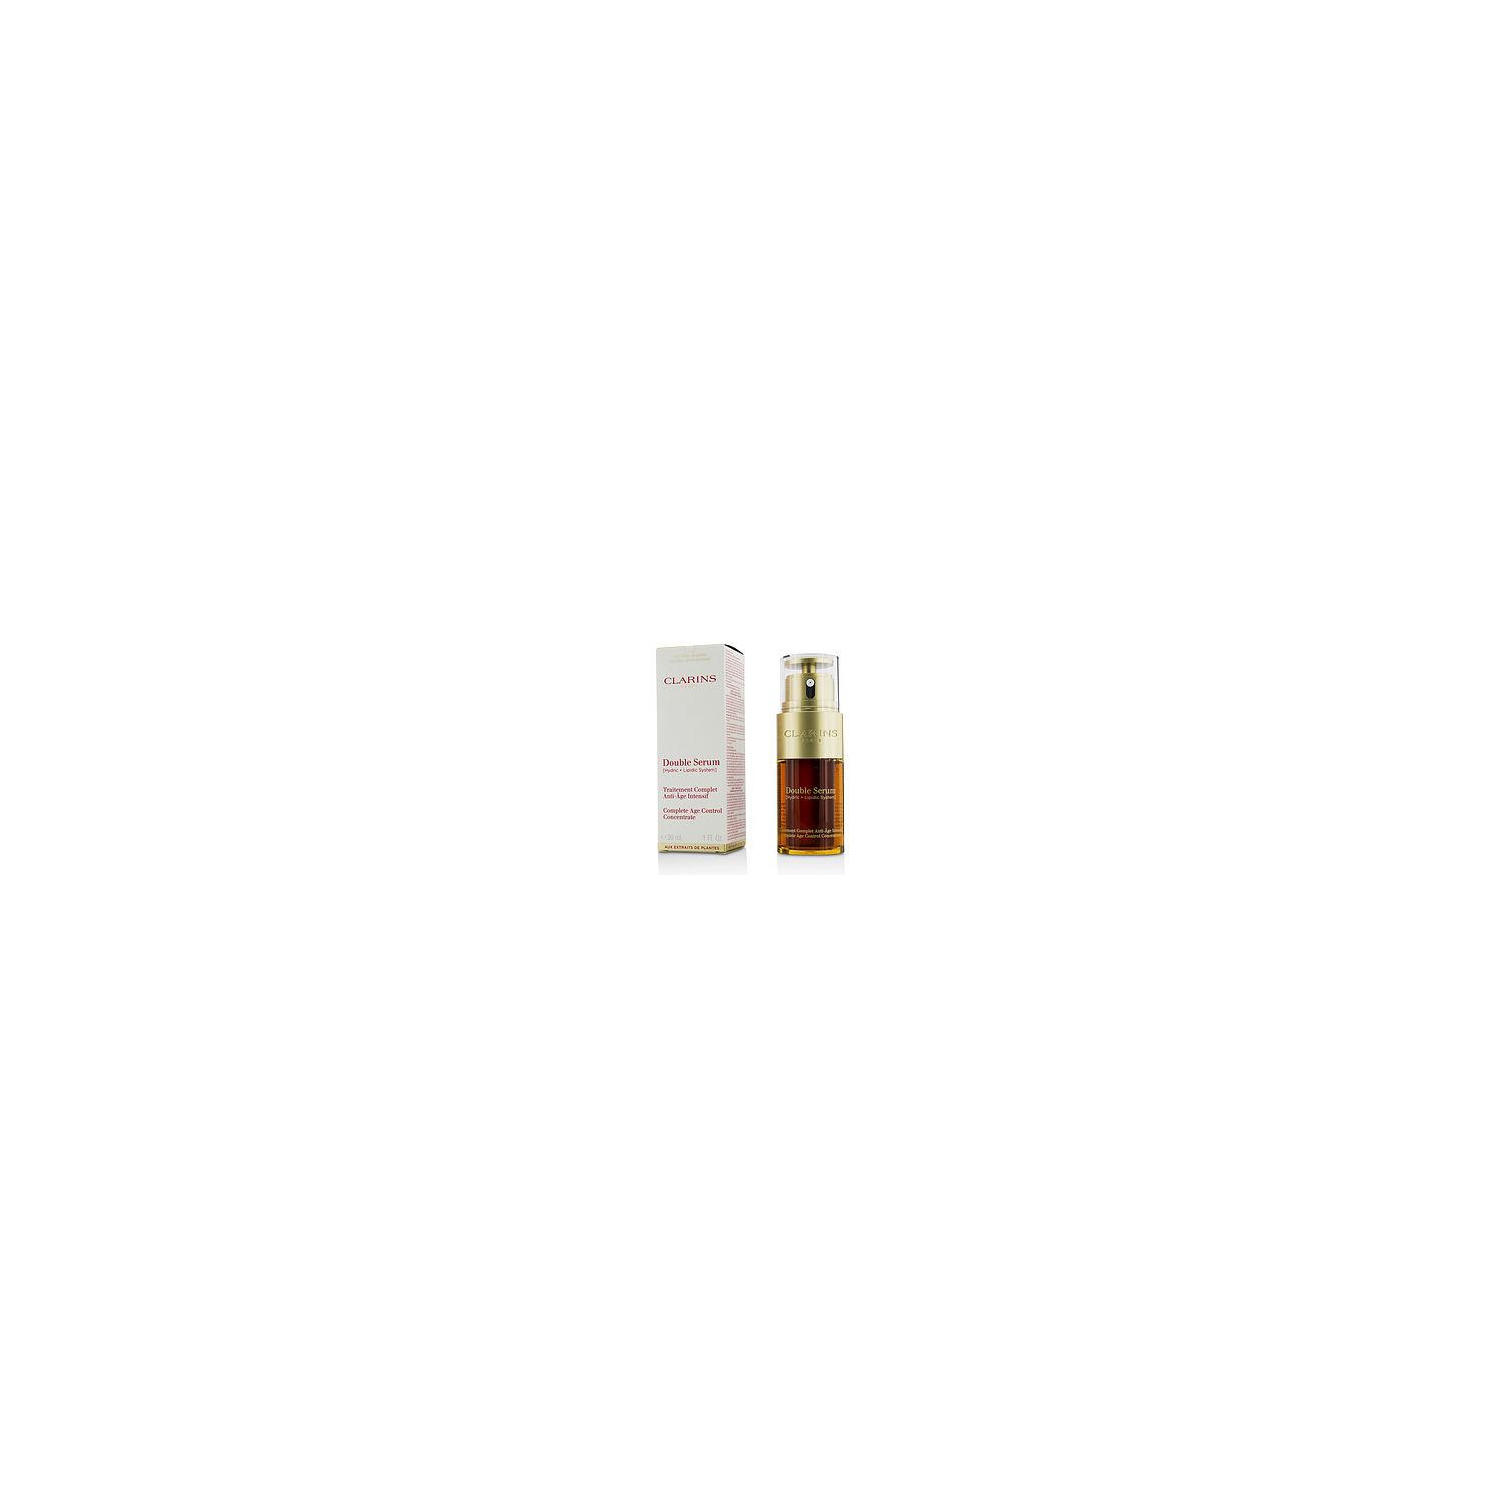 Double Serum (Hydric + Lipidic System) Complete Age Control Concentrate - 30ml-1oz